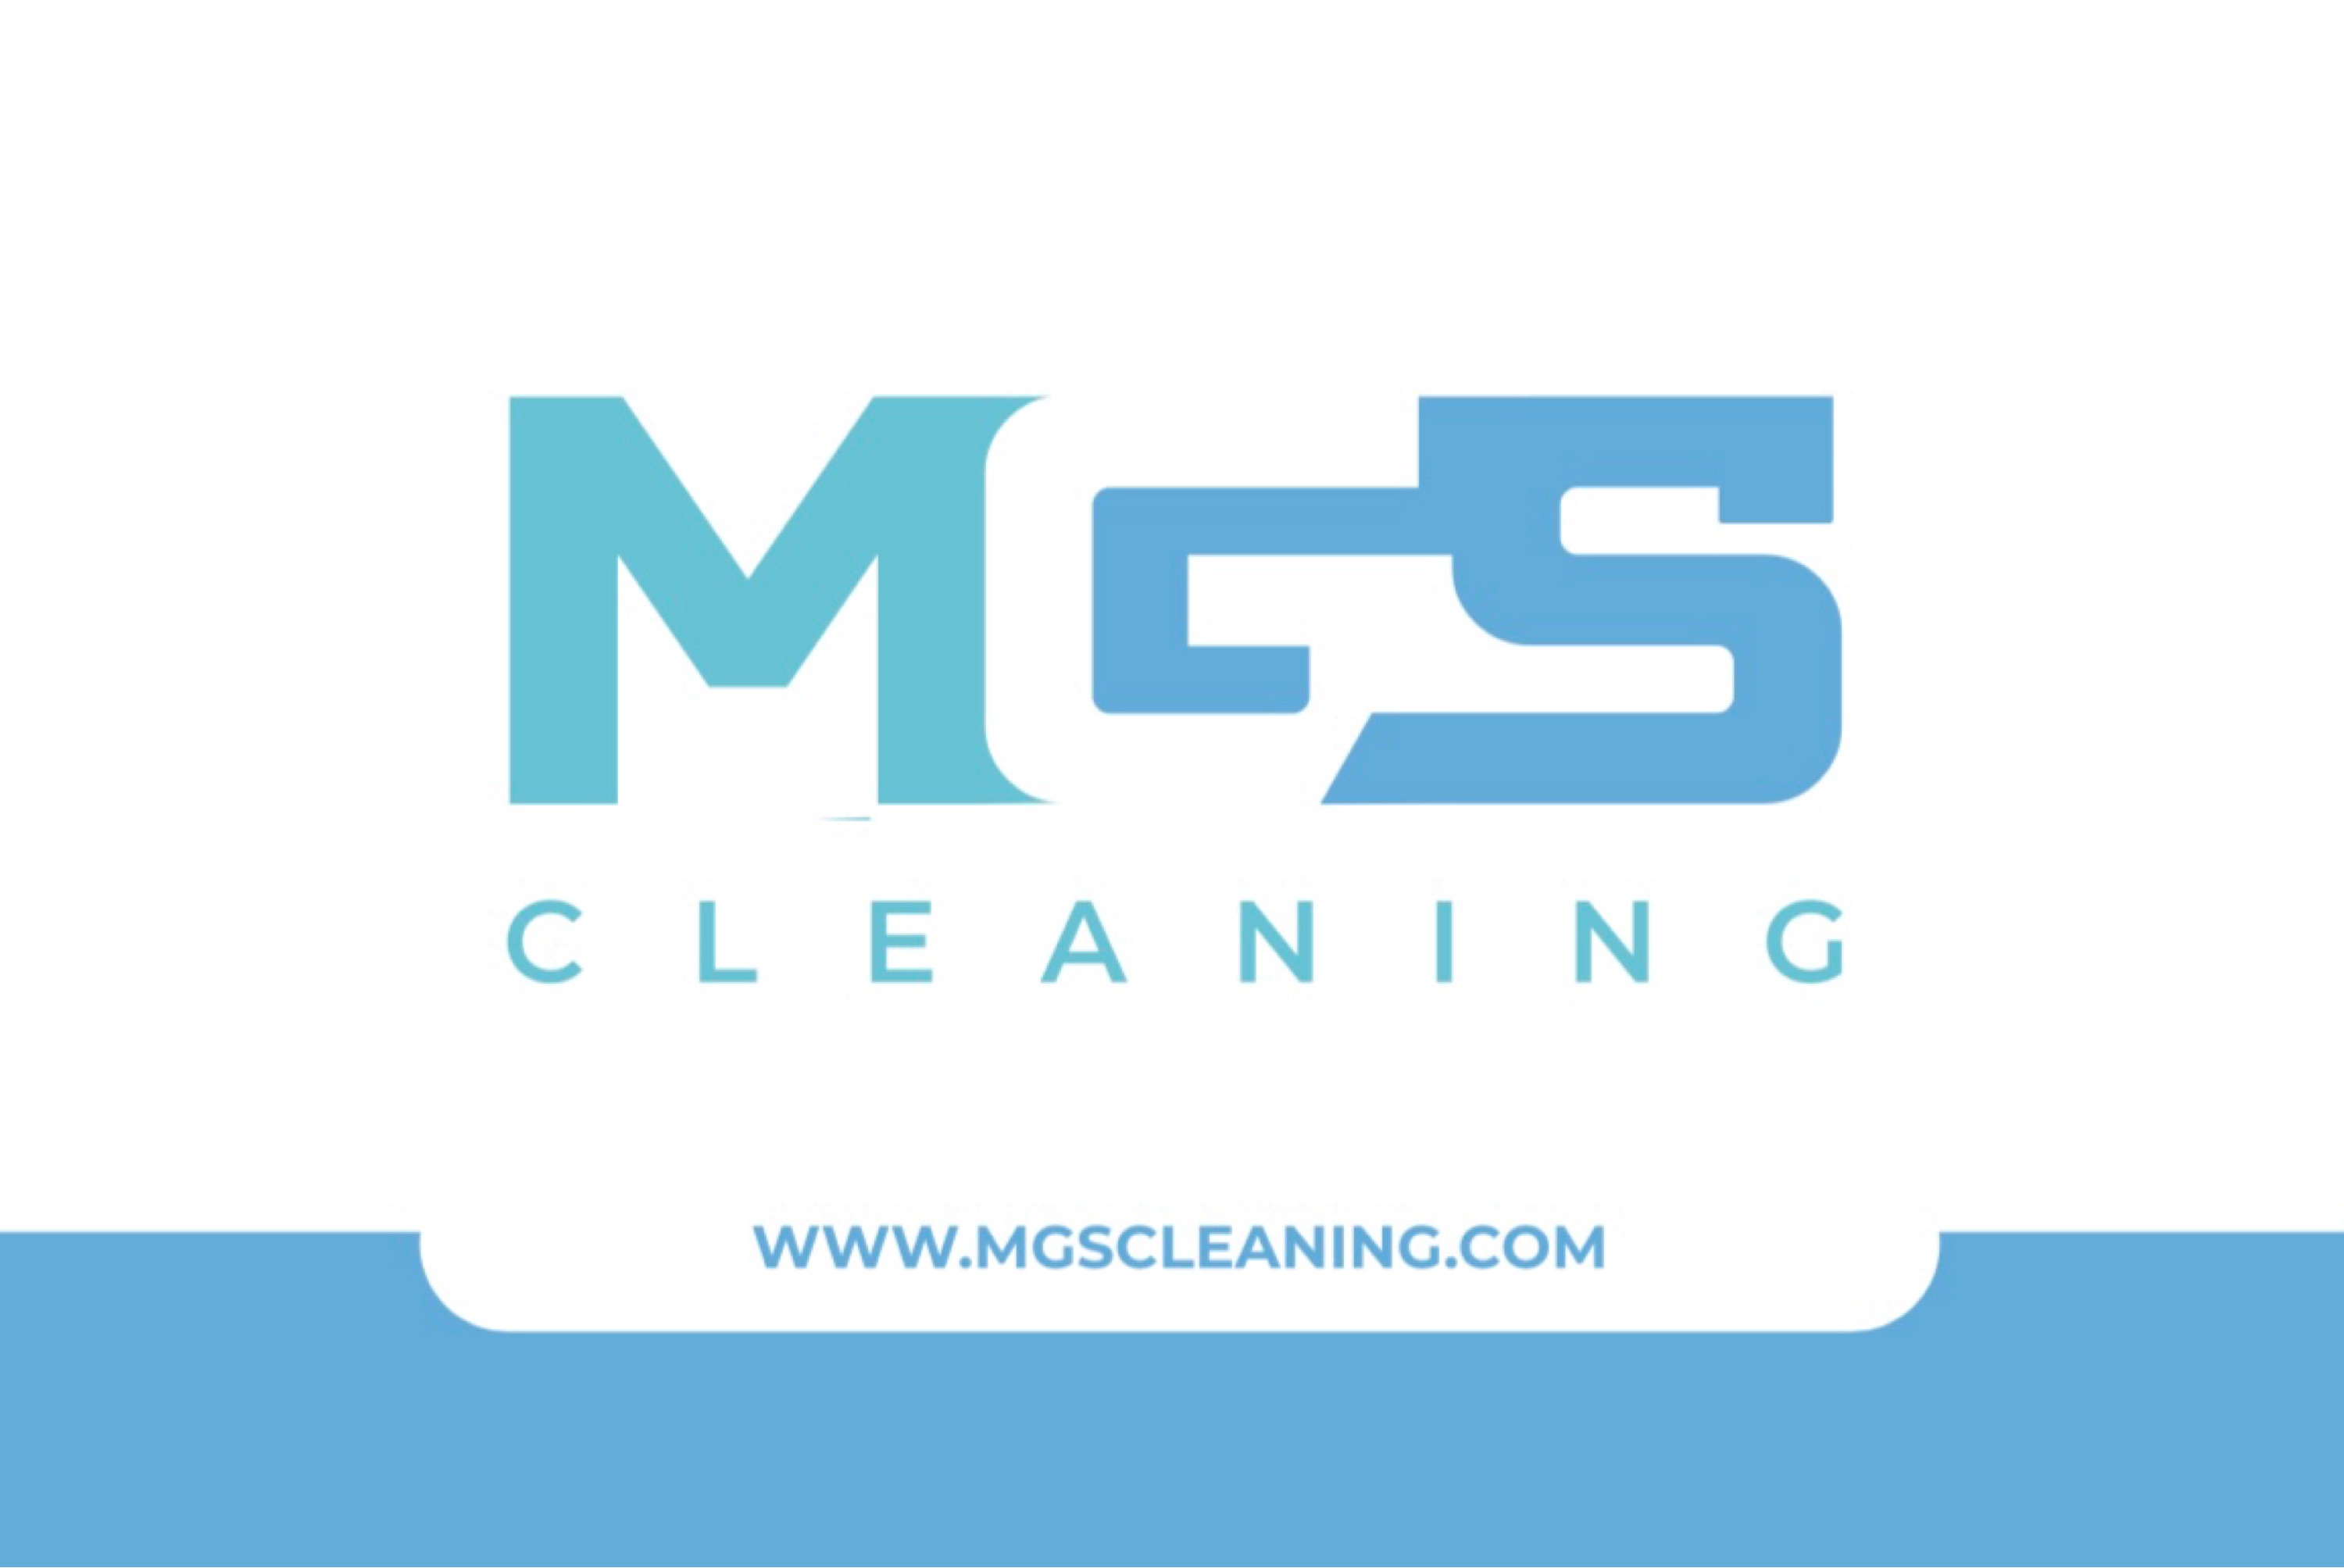 MGS Cleaning Logo